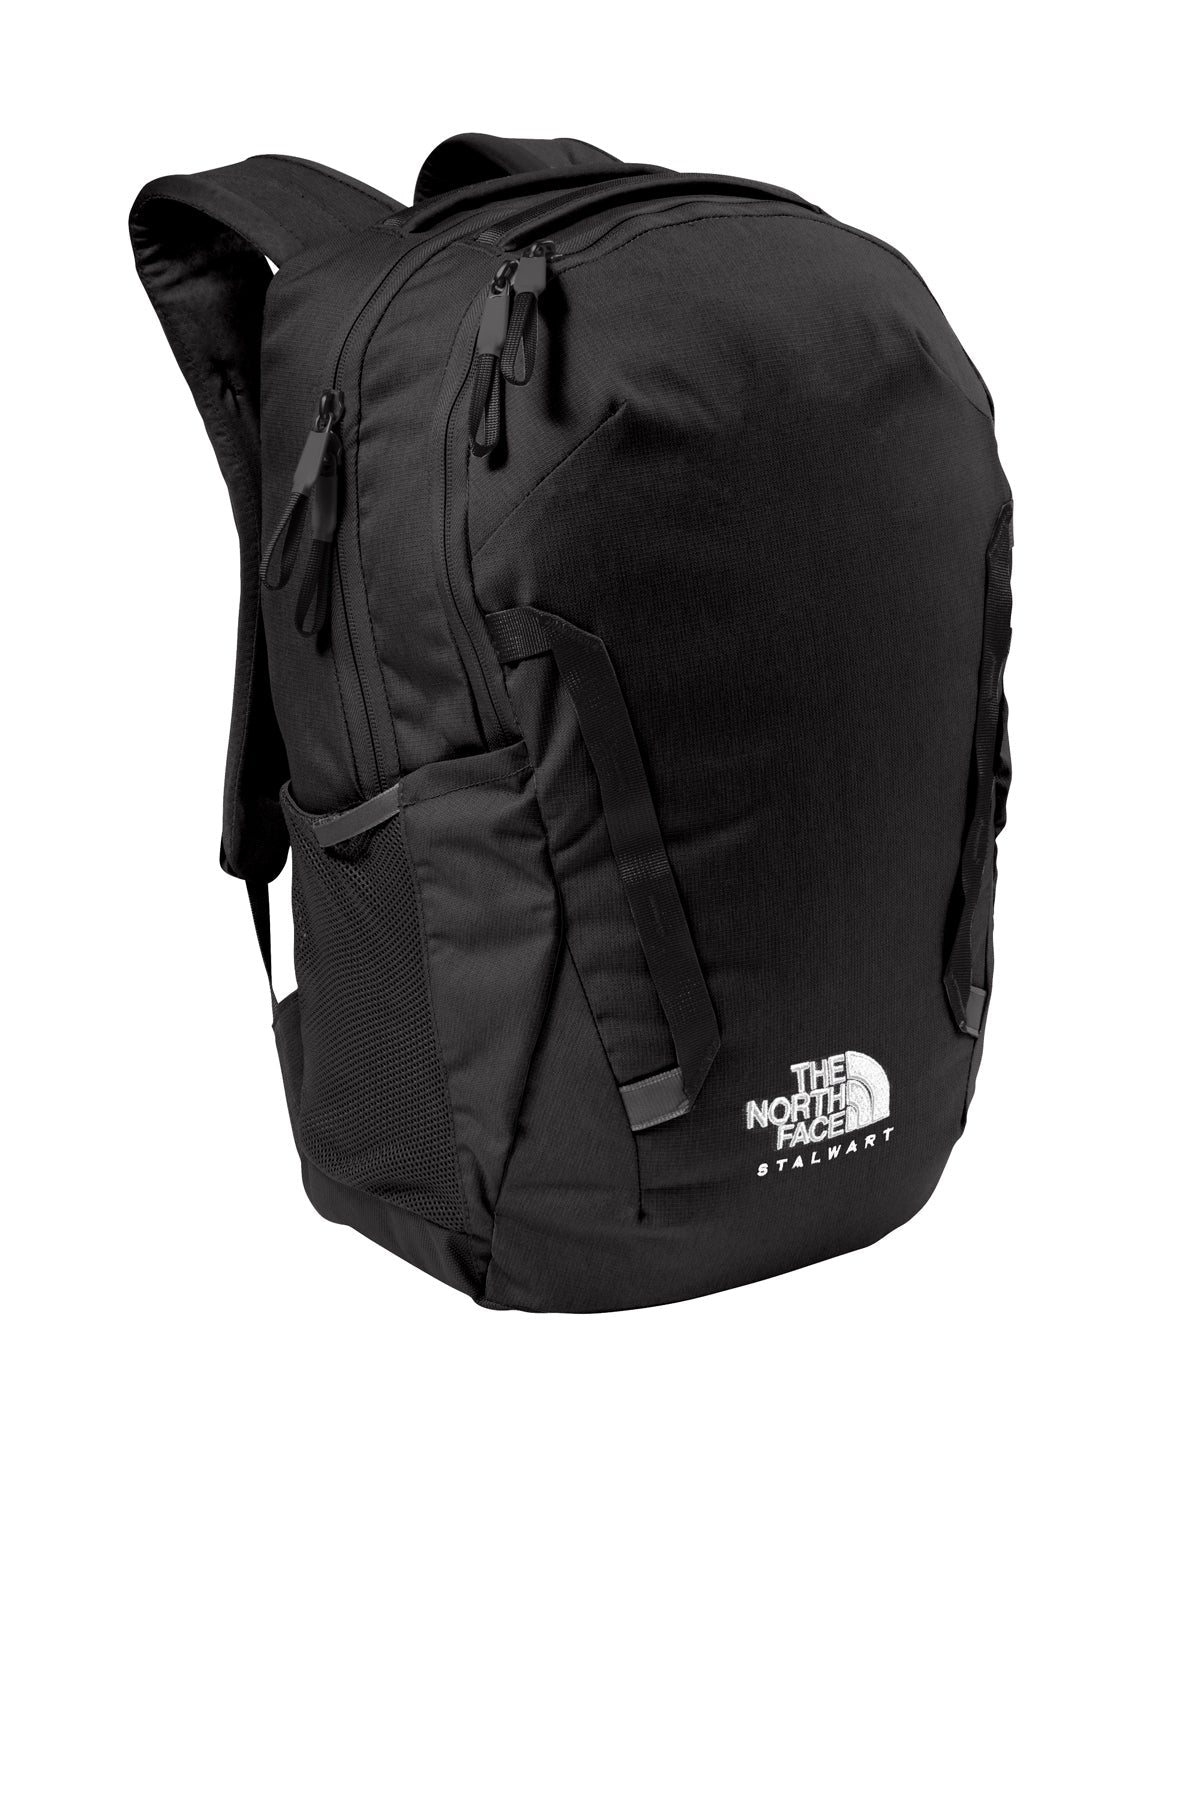 The North Face Stalwart Backpack TNF Black